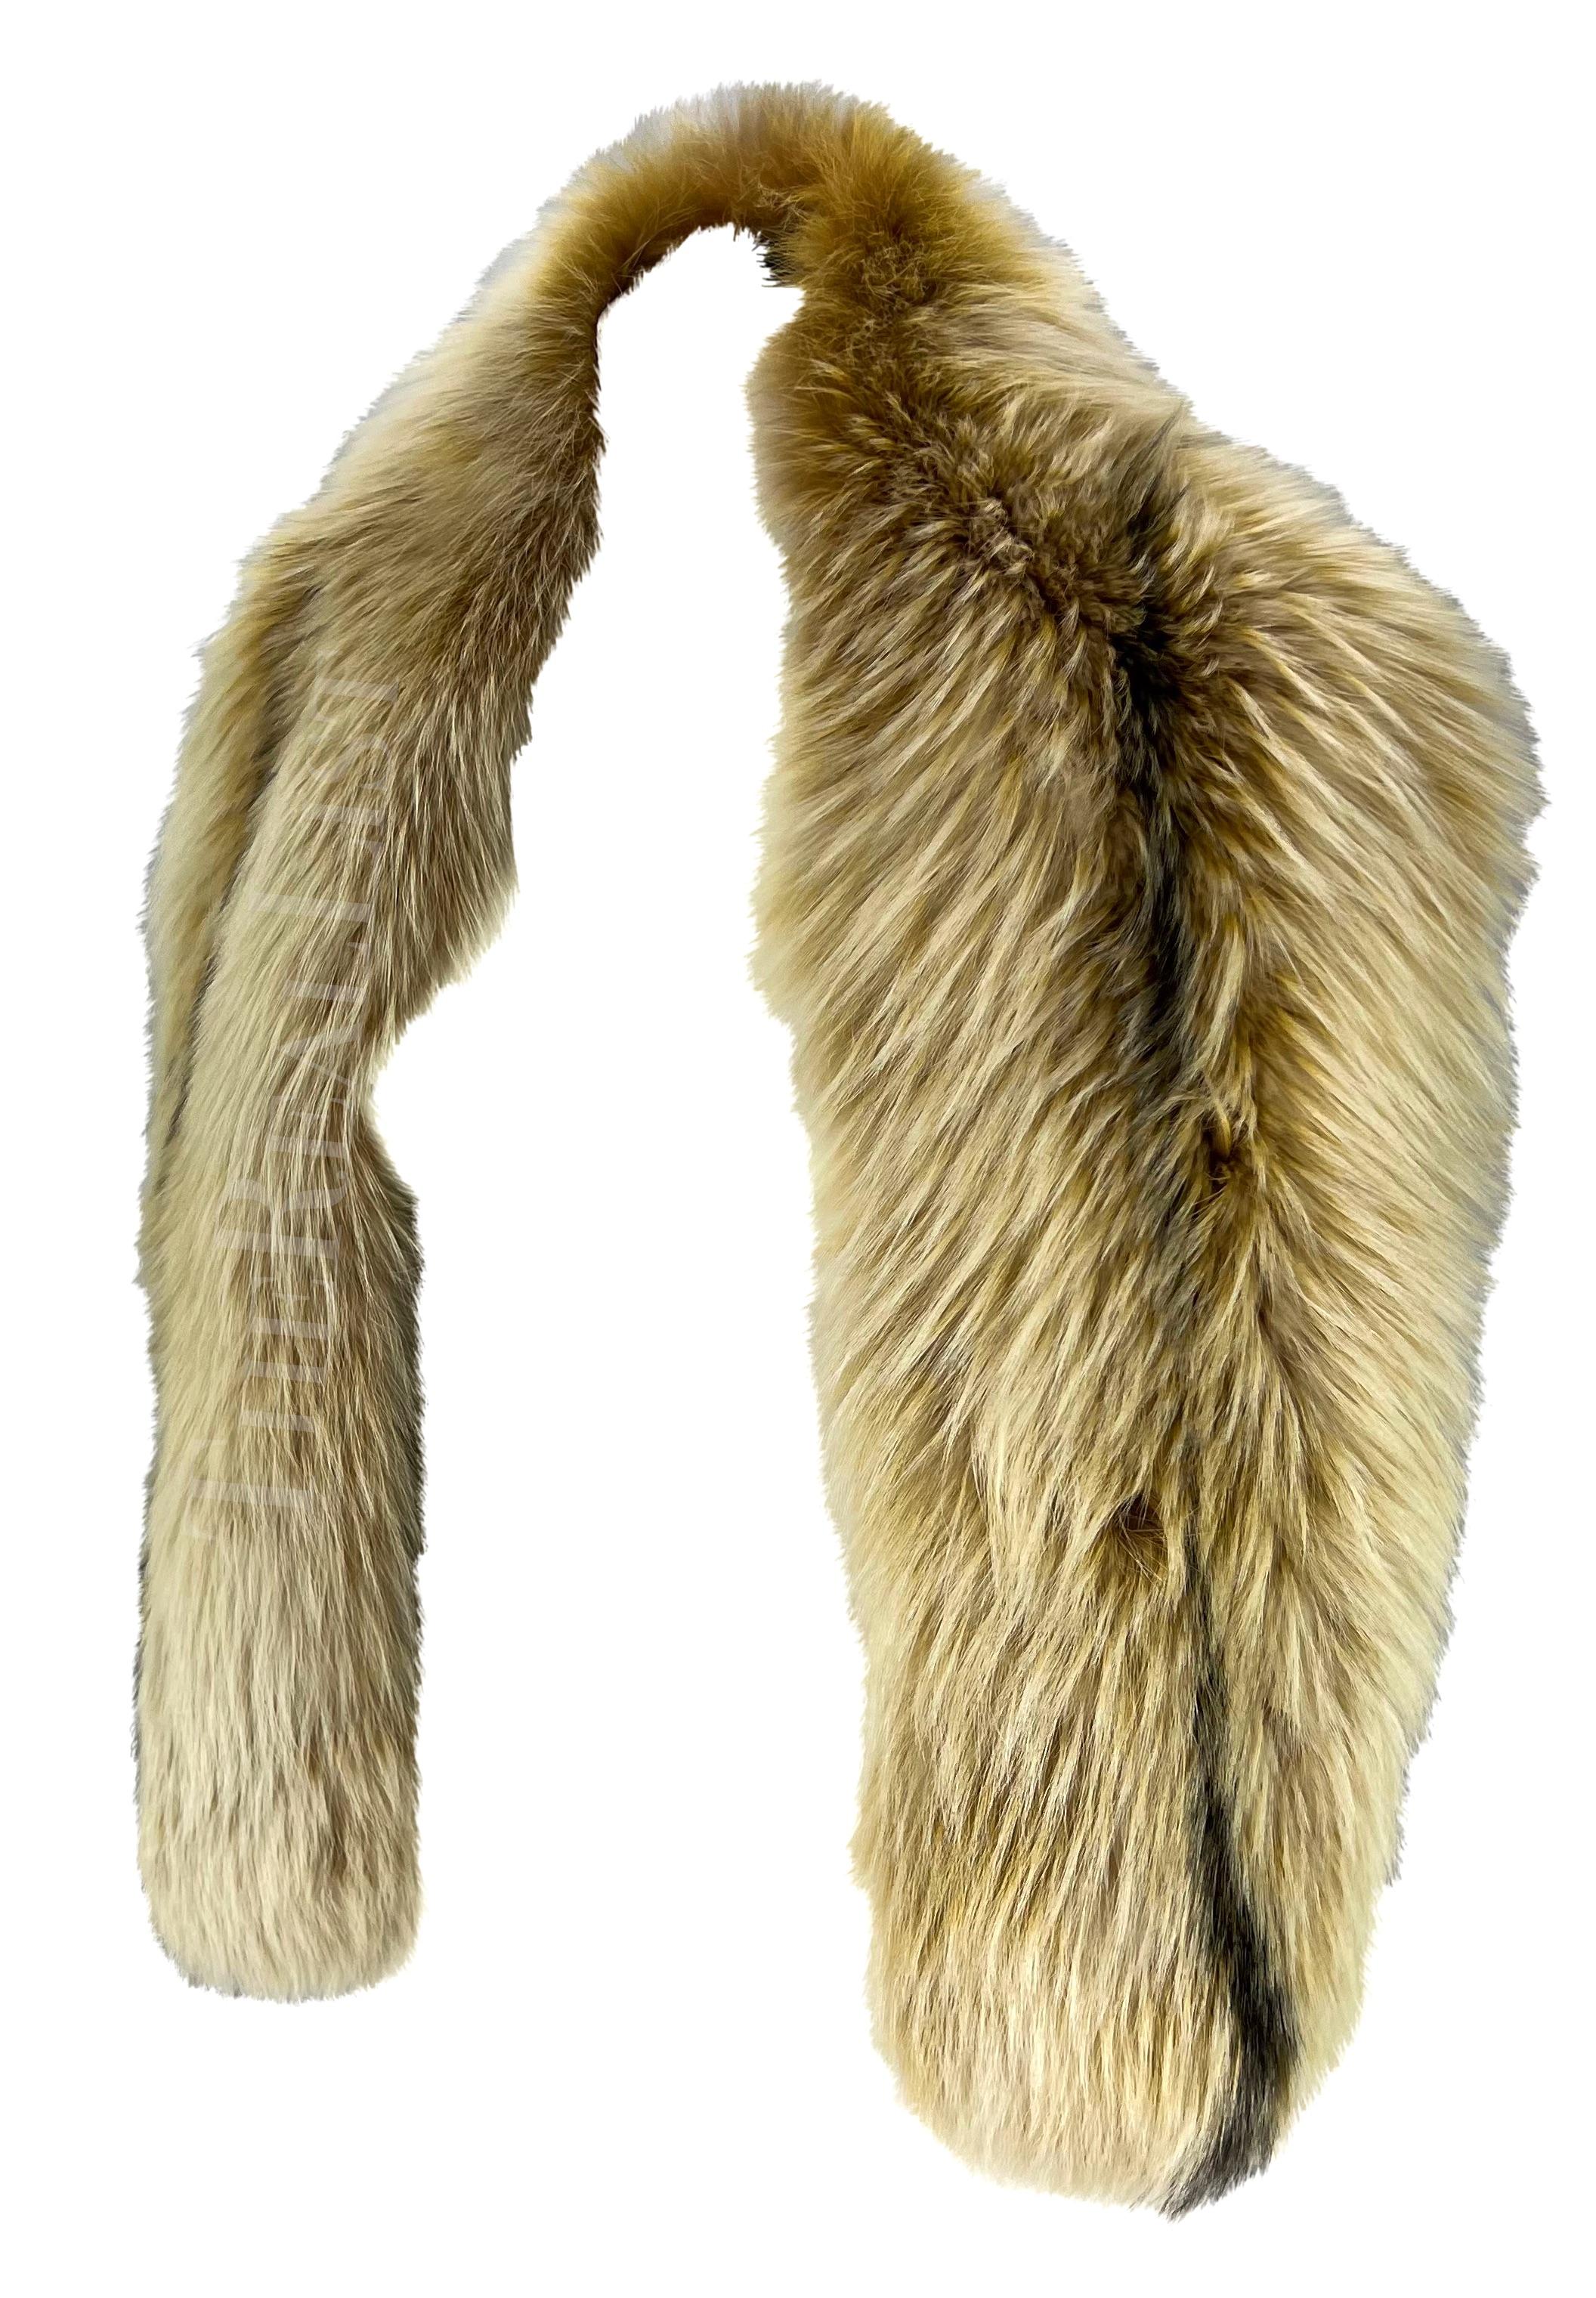 Presenting a fabulous tan Roberto Cavalli stole. Elevate your winter wardrobe with this fabulous tan Roberto Cavalli stole, a chic accessory that exudes classic elegance and sophistication. From the 2010s, this stole offers a timeless allure that